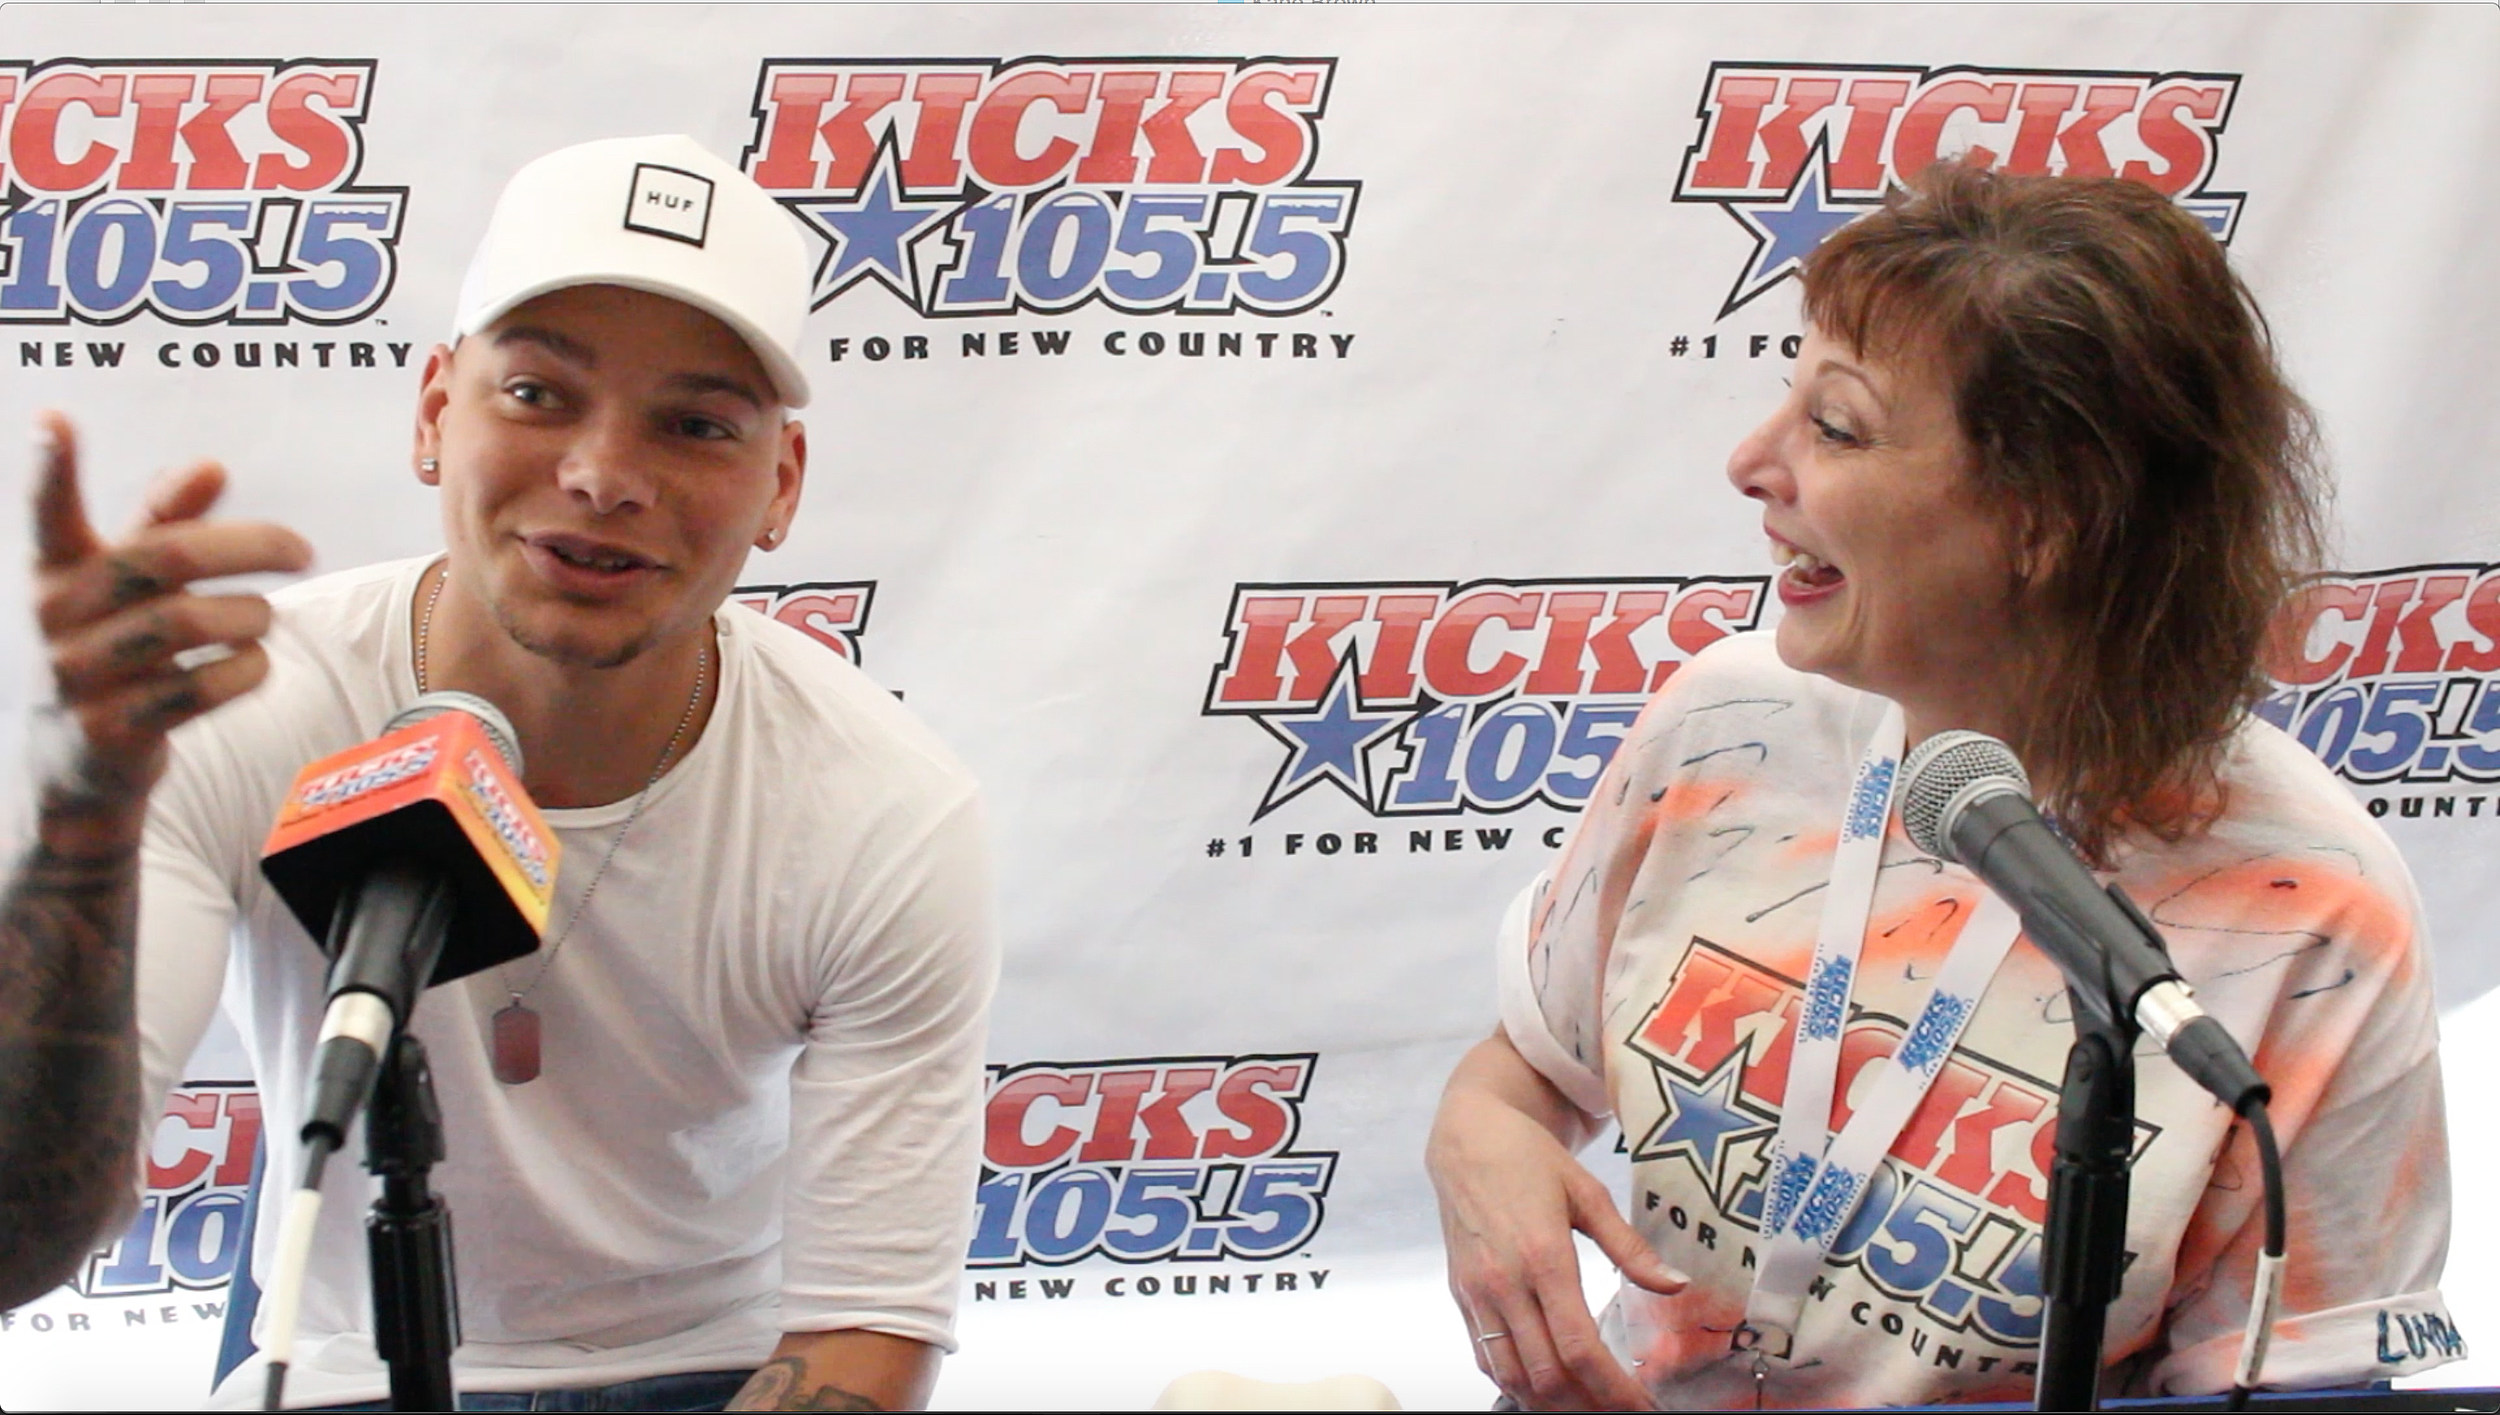 Pin by Sol on Kane brown | Kane brown, Kane brown music, Brown time